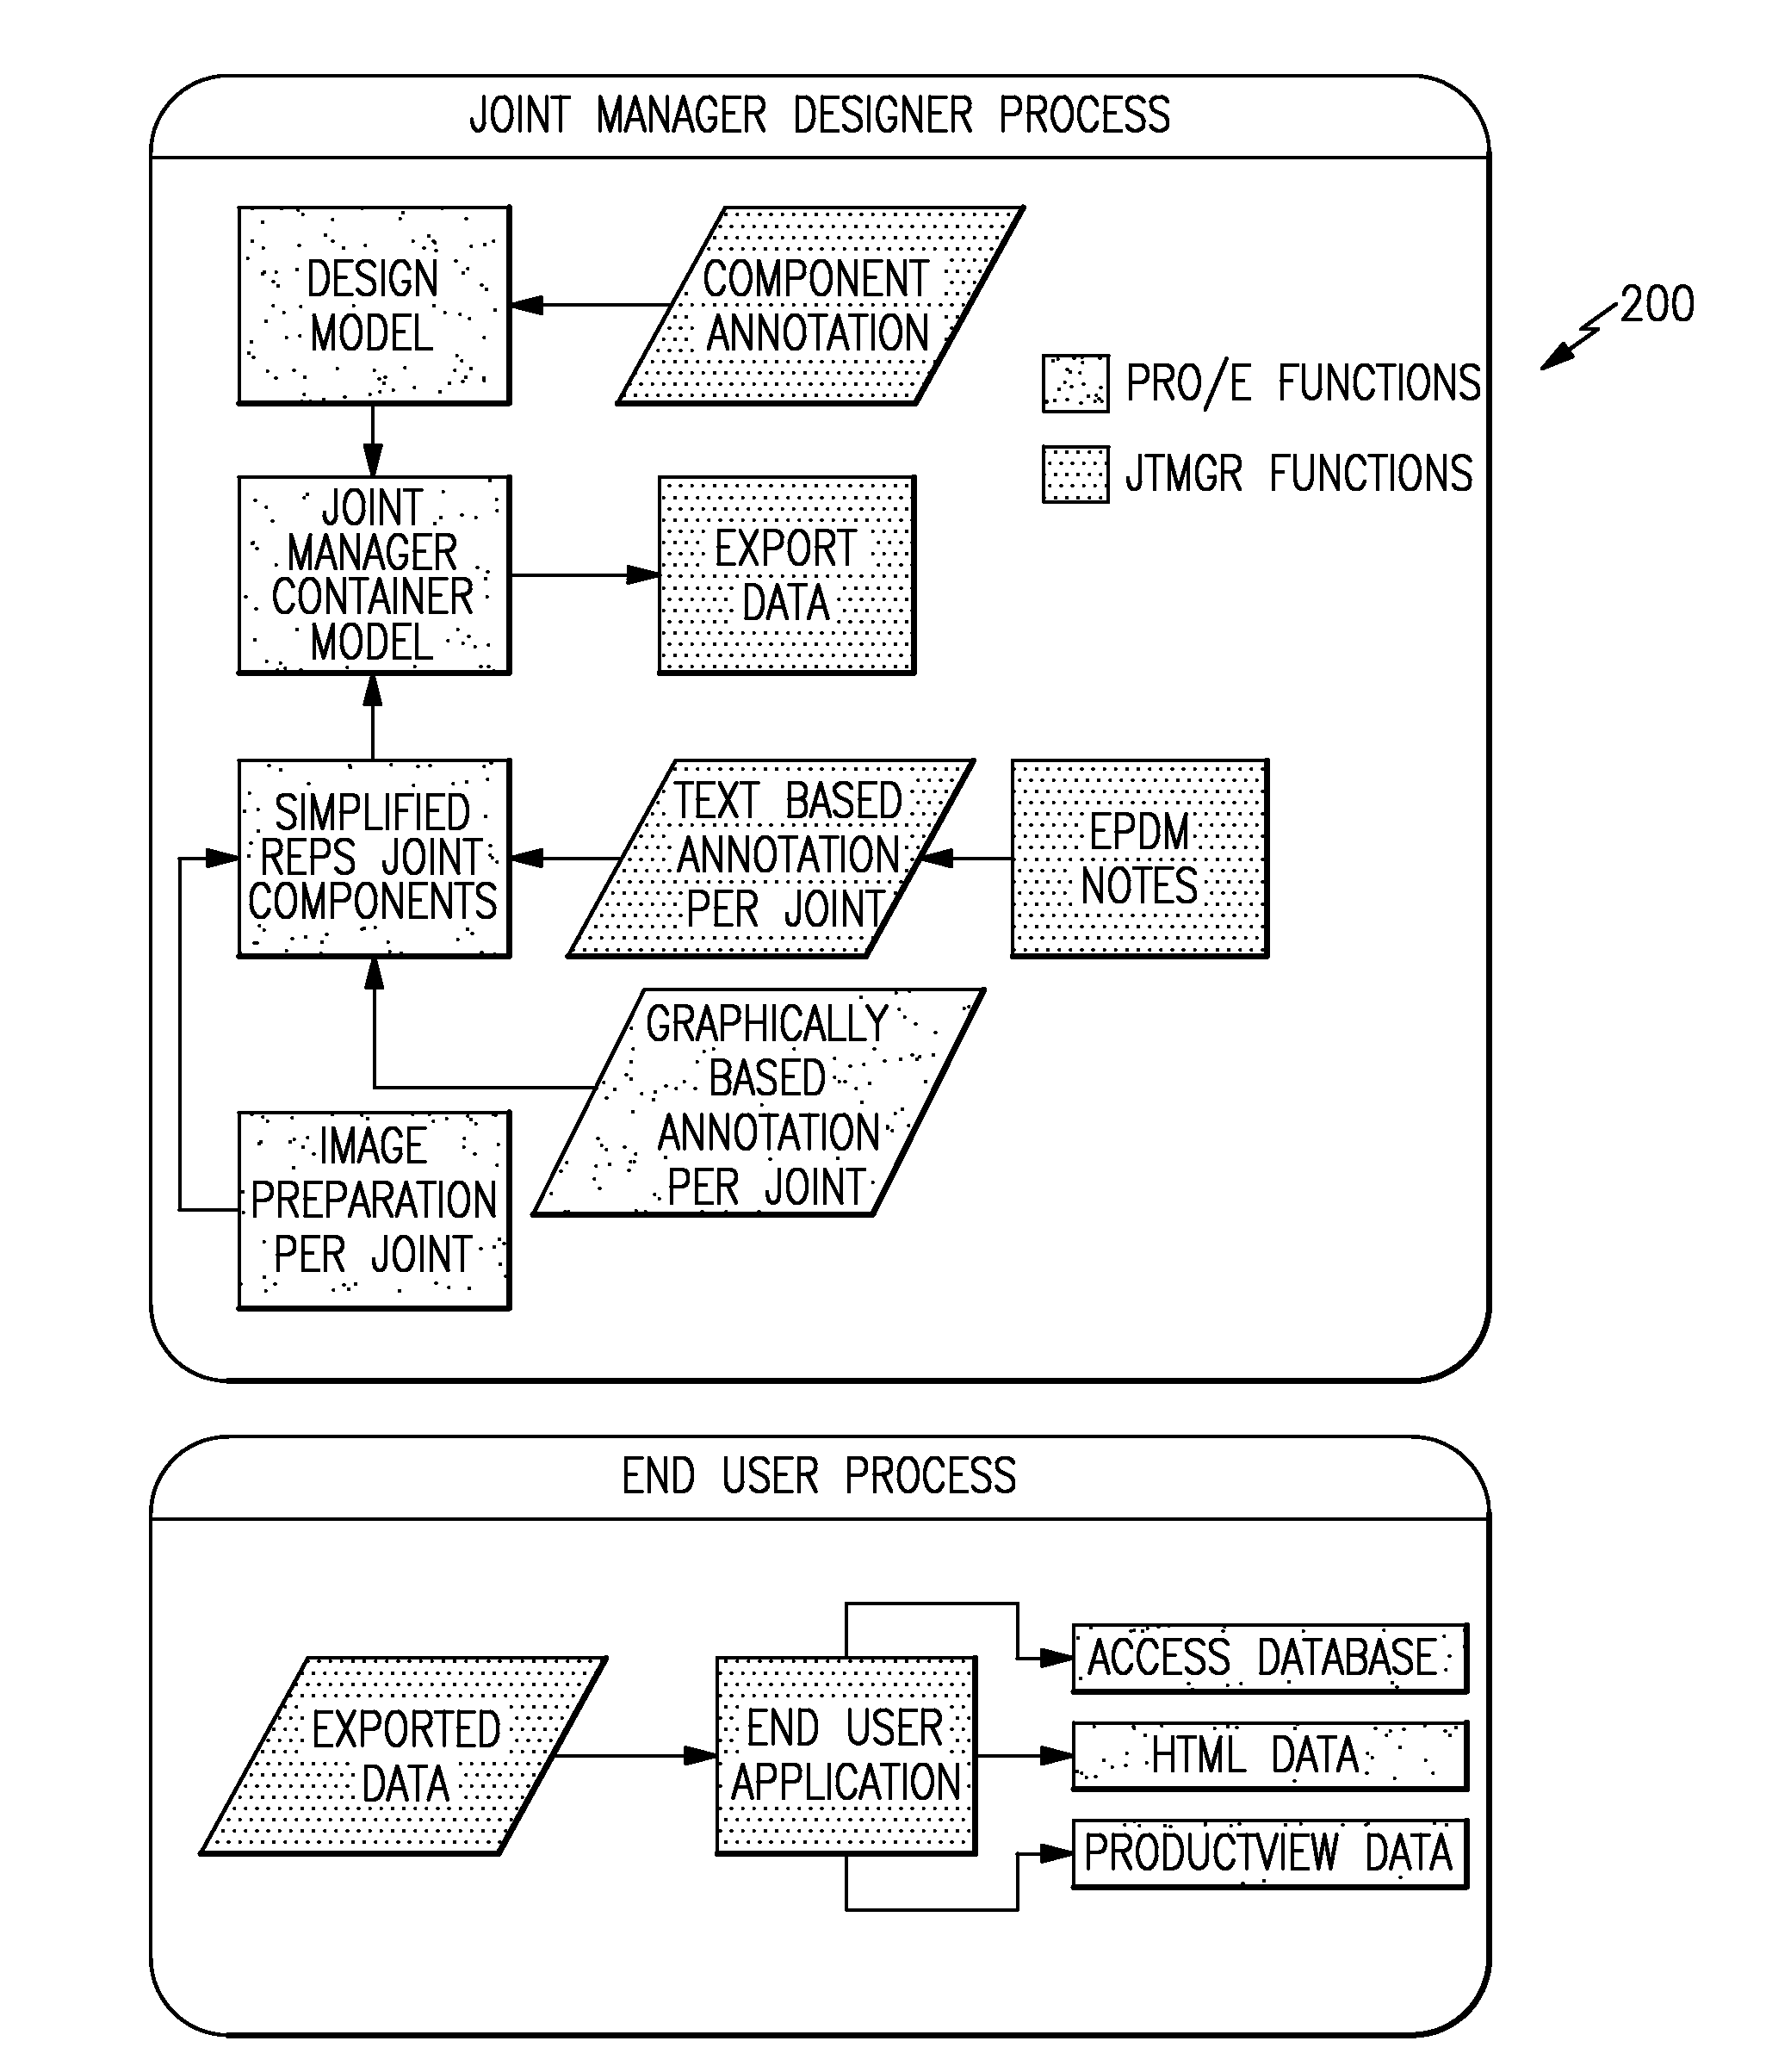 Model based definition installation and assembly drawing process